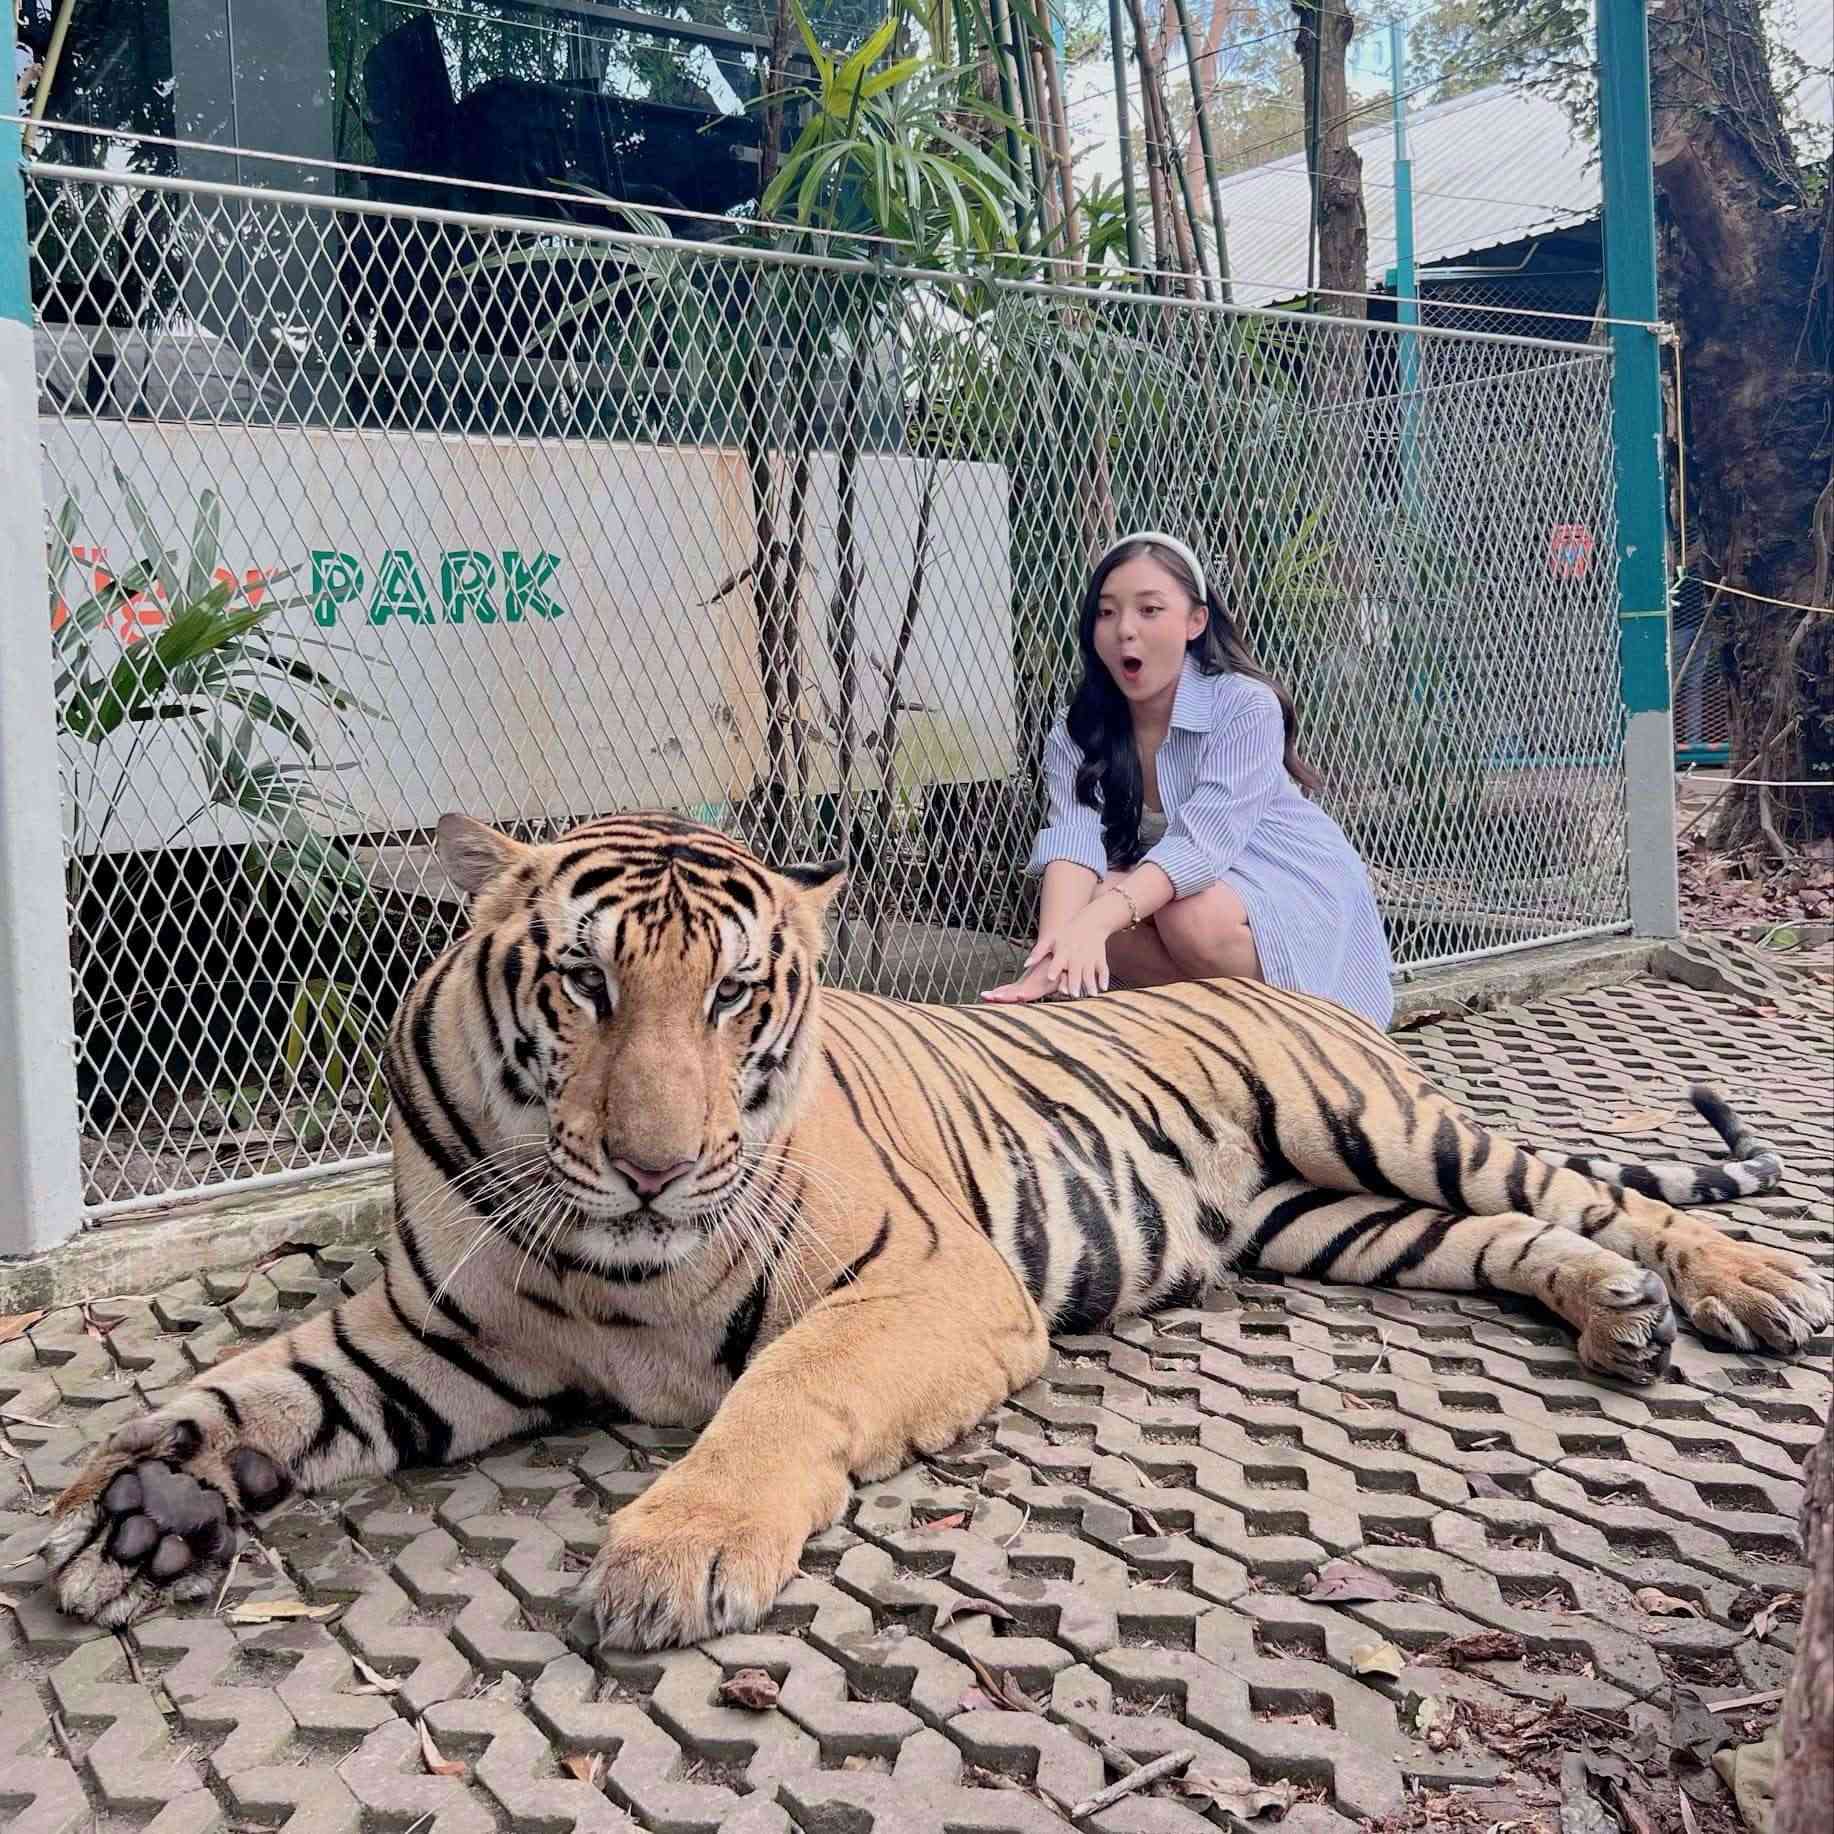 The female MC took a photo with a real tiger.